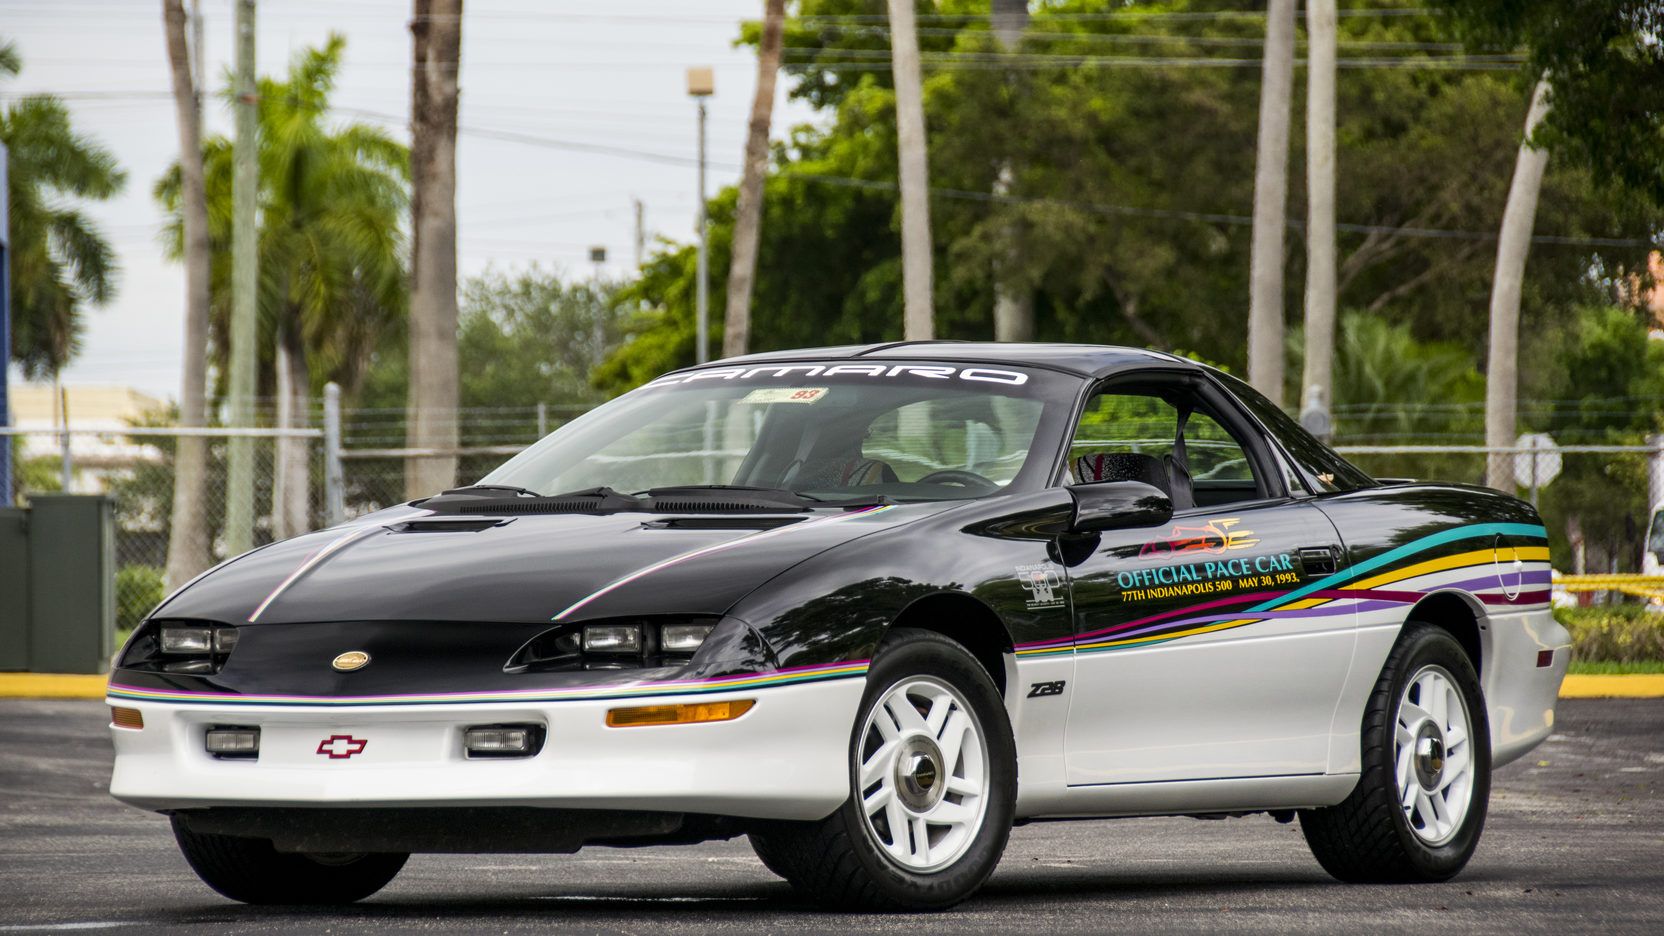 1993 Chevrolet Camaro Z28 Indy Pace Car in a parking lot